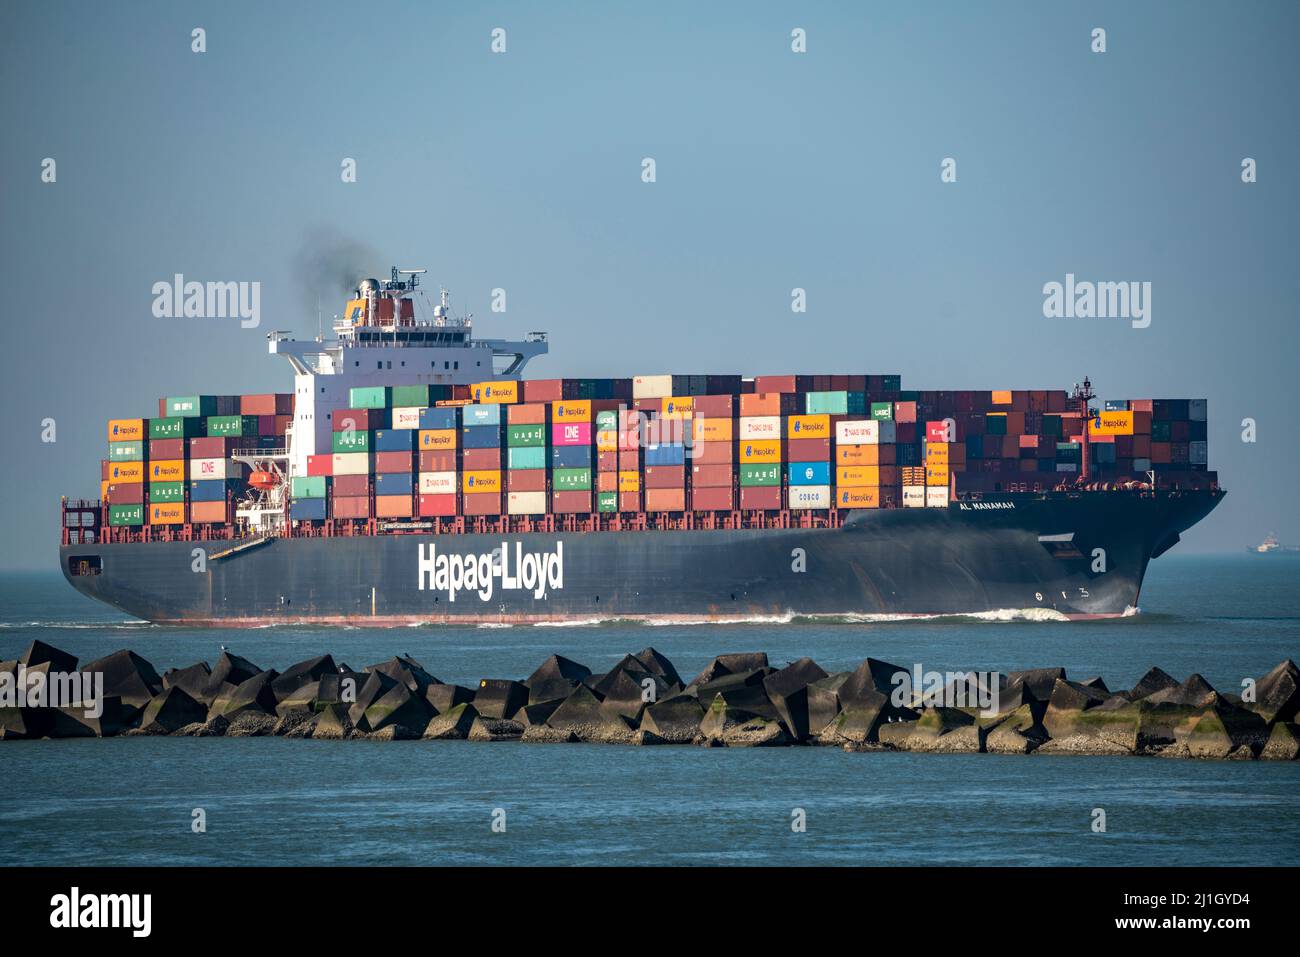 Container cargo ship Al Manamah, owned by Hapag-Lloyd, in the harbor  entrance of the deep-sea port Maasvlakte 2, the seaport of Rotterdam,  Netherlands Stock Photo - Alamy